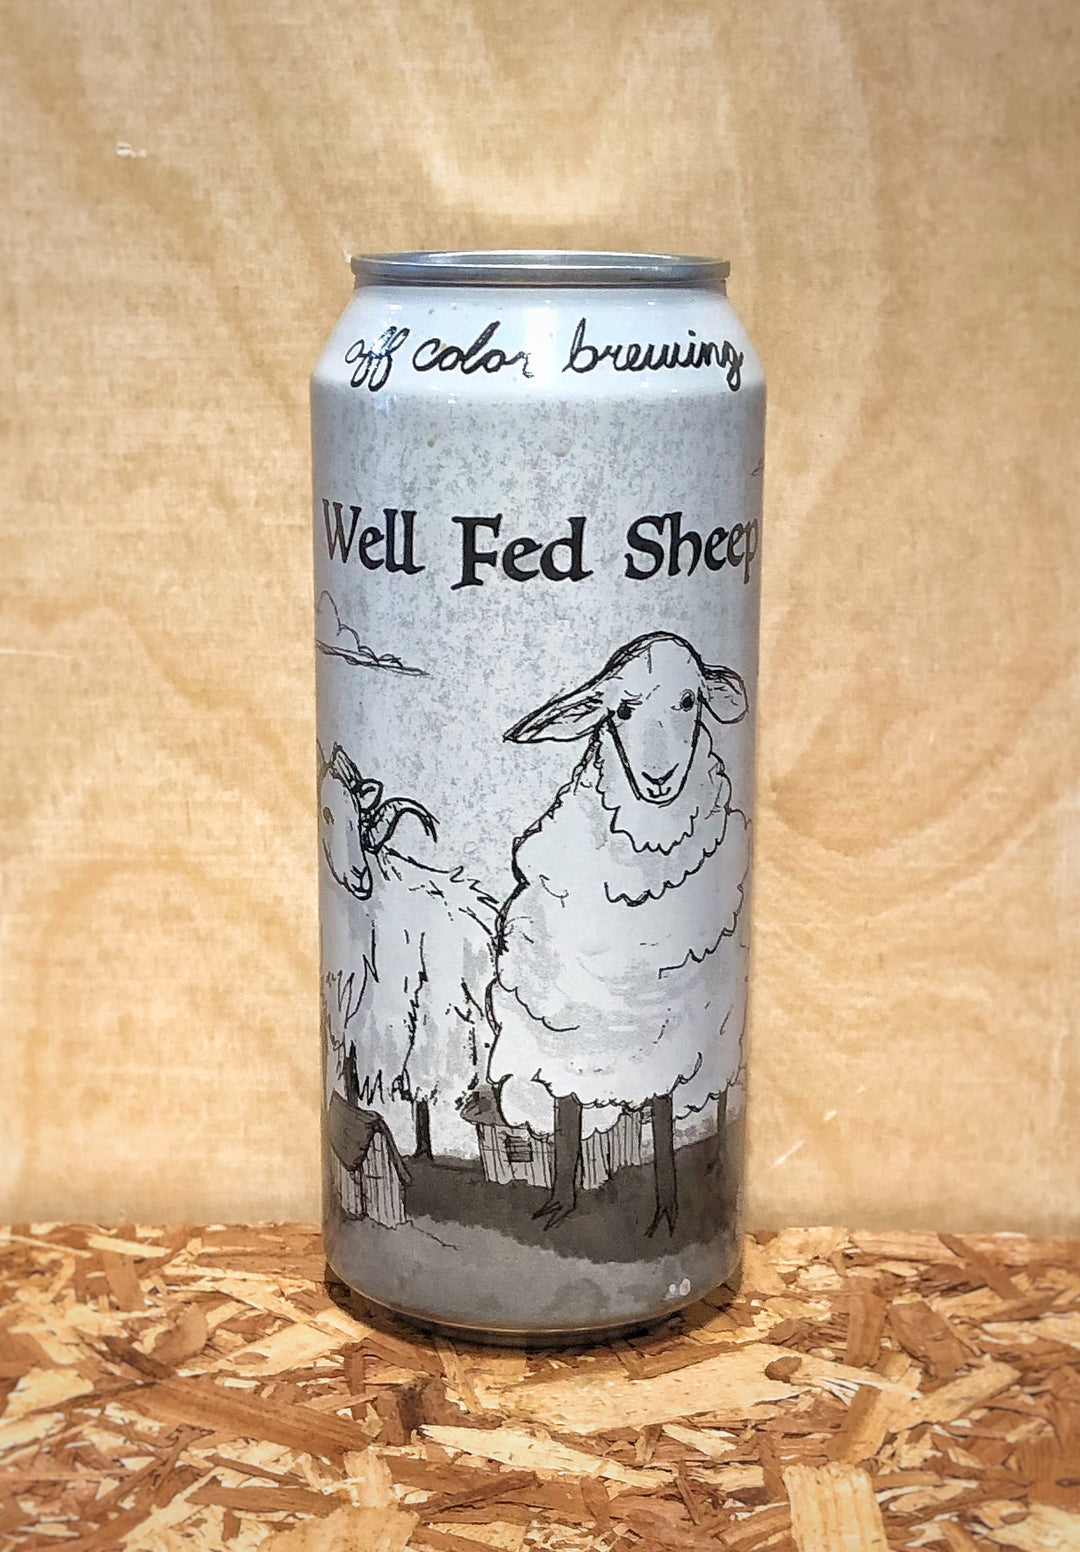 Off Color Brewing 'Well Fed Sheep' Scotch Style Ale brewed with Honey (Chicago, IL)